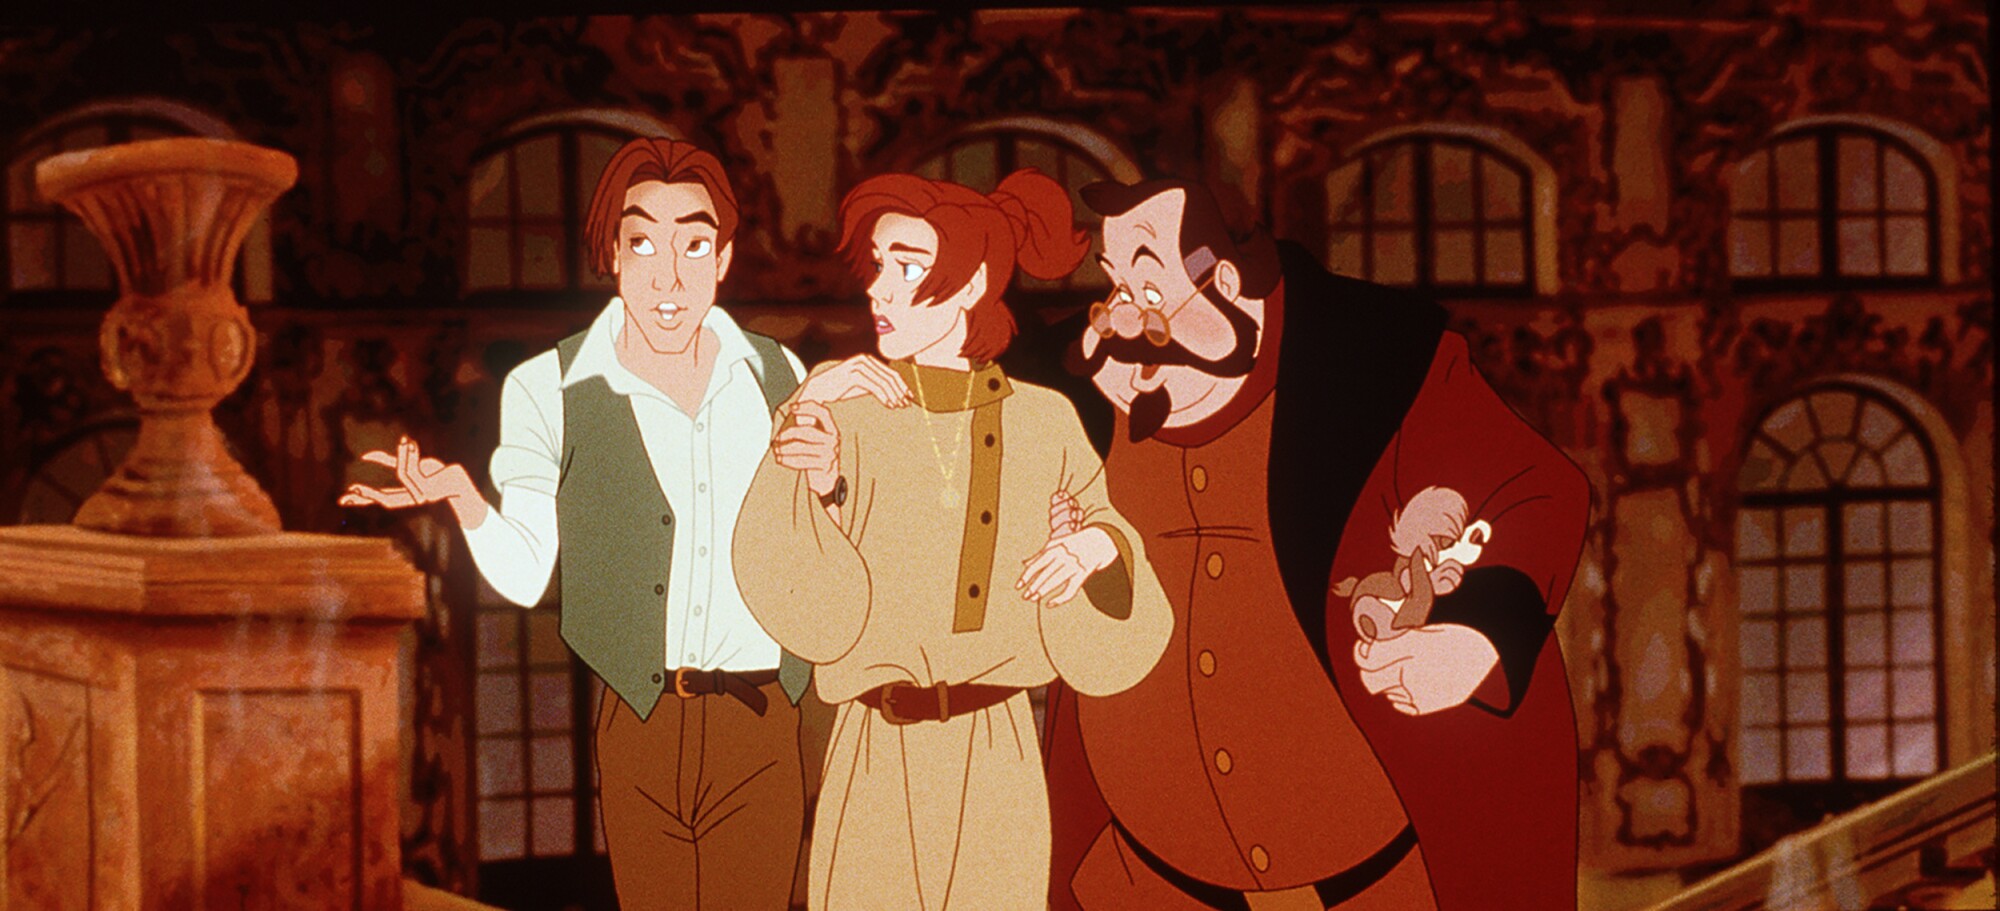 A scene from the animated film "Anastasia."